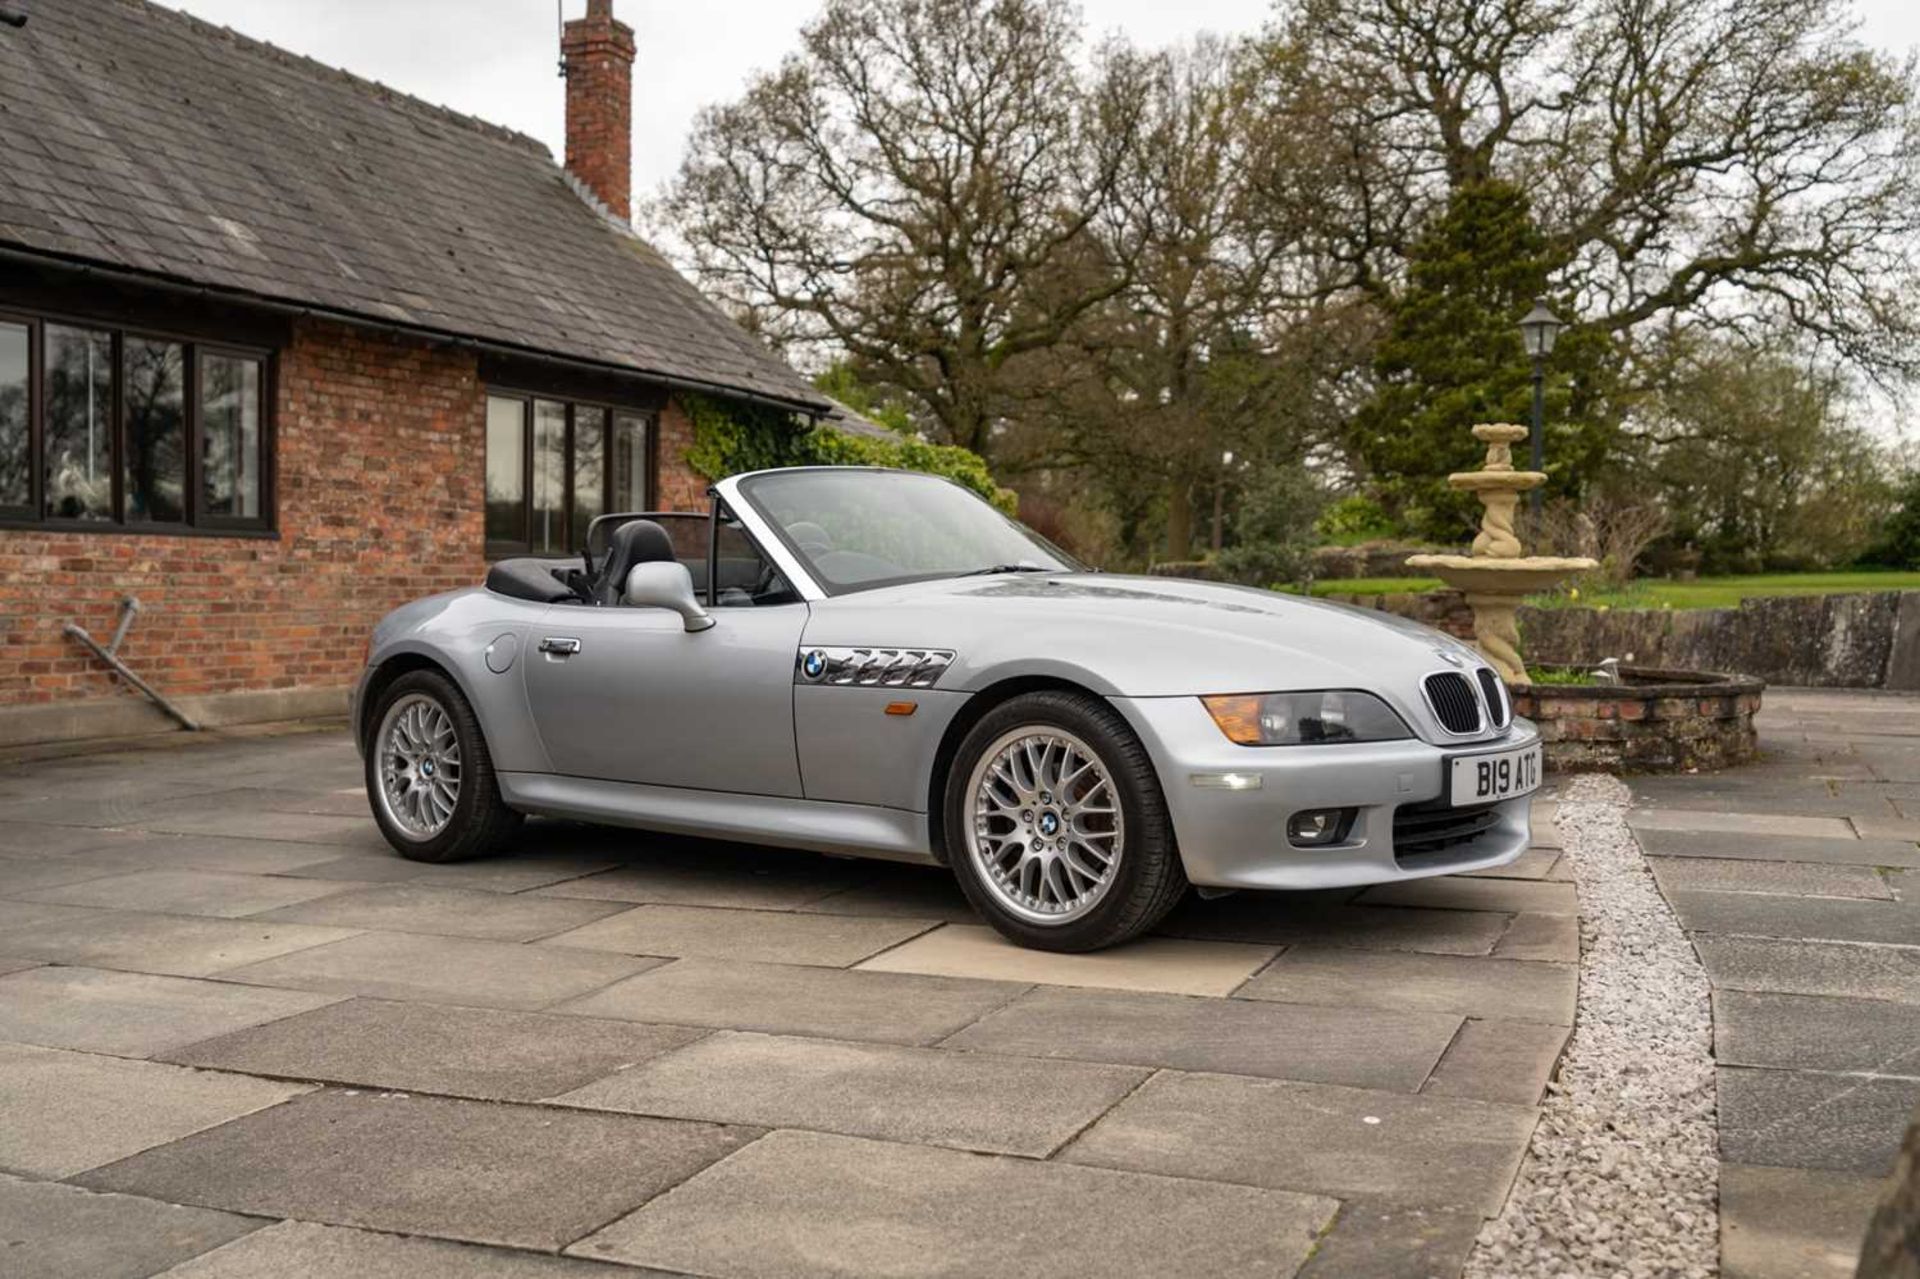 1997 BMW Z3 2.8 Same family ownership for 22 years, Desirable manual with 12 months MOT  - Image 15 of 66